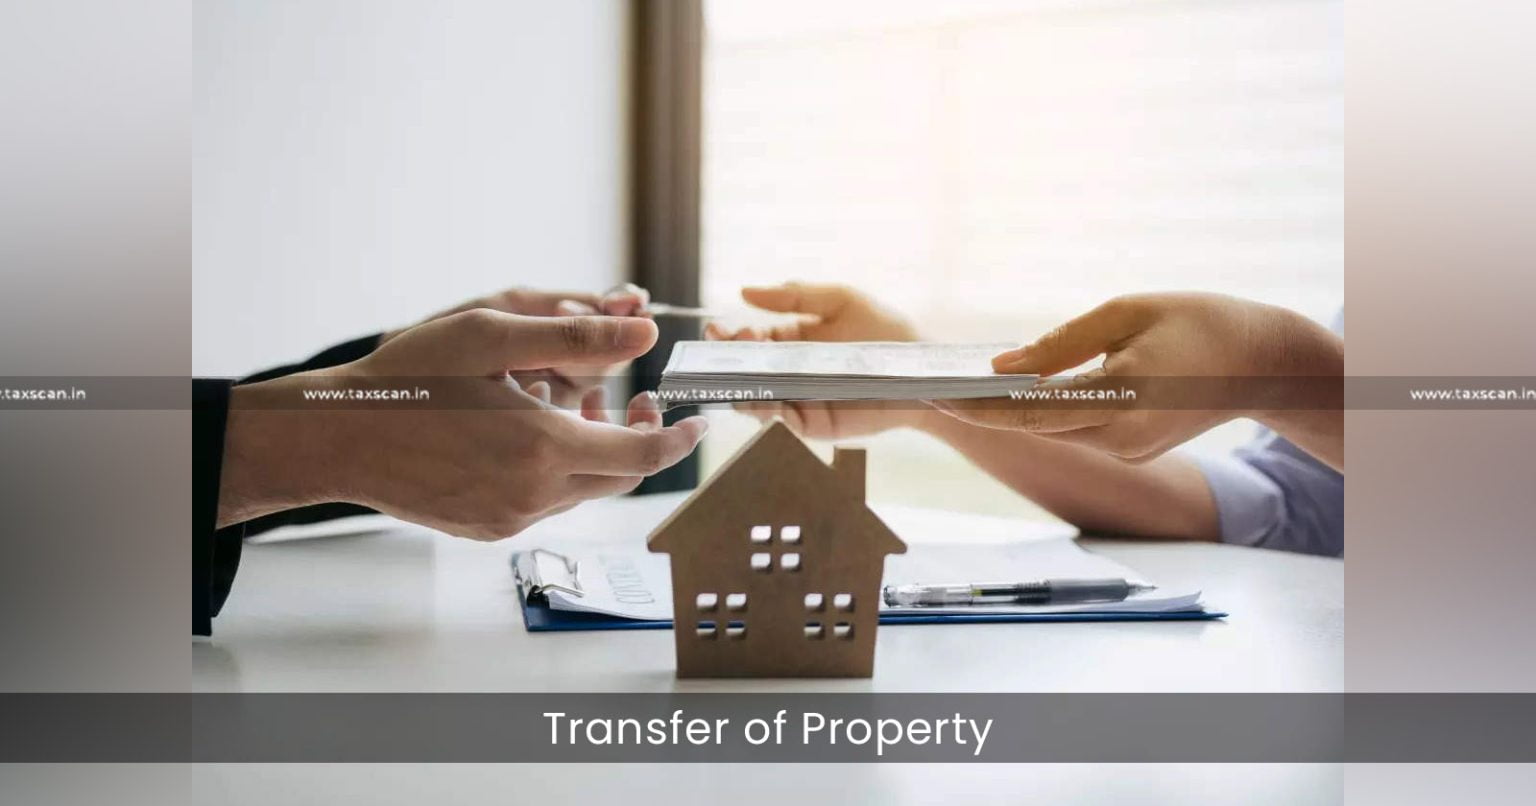 Transfer of property - extinguishing rights of owners - ITAT - capital gain exemption - taxscan